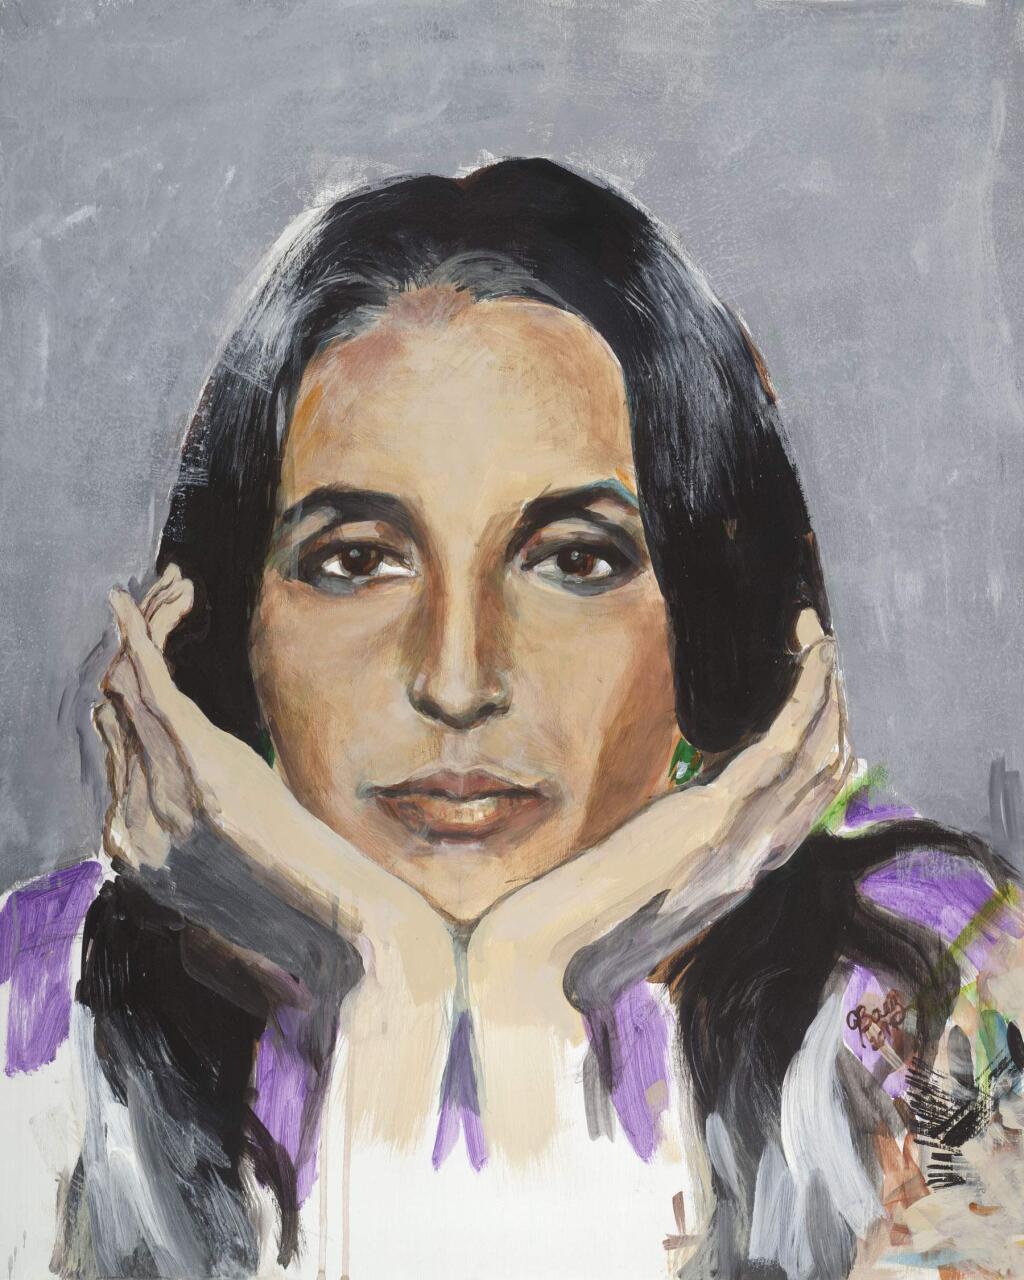 JOAN BAEZ / f Seager Gray GalleryIn her first solo painting exhibition, Joan Baez celebrates the “Mischief Makers' - portraits of people who have brought about social change through nonviolent action - the risk-taking visionaries. The cast of characters, most of whom Joan Baez has known personally, include Martin Luther King, Jr., Burmese leader Aung San Suu Kyi, Czech Velvet Revolution leader Vaclav Havel, Malala Yousafzai, Bob Dylan, Congressman John Lewis, farm worker heroine Dolores Huerta, folk legend and activist Harry In her first solo painting exhibition, Joan Baez celebrates the “Mischief Makers' - portraits of people who have brought about social change through nonviolent action - the risk-taking visionaries.Belafonte, poet and civil rights activist Maya Angelou, spiritual leader Ram Dass, the Dalai Lama, Bread and Roses founder Mimi Farin~a, civil rights leader Reverend William Barber, Vietnam draft resistance leader and author David Harris, and native American medicine woman and activist Marilyn Youngbird. She also includes a portrait of herself as a young woman and one of a young monk inspired by a portrait she saw during a trip to Vietnam.